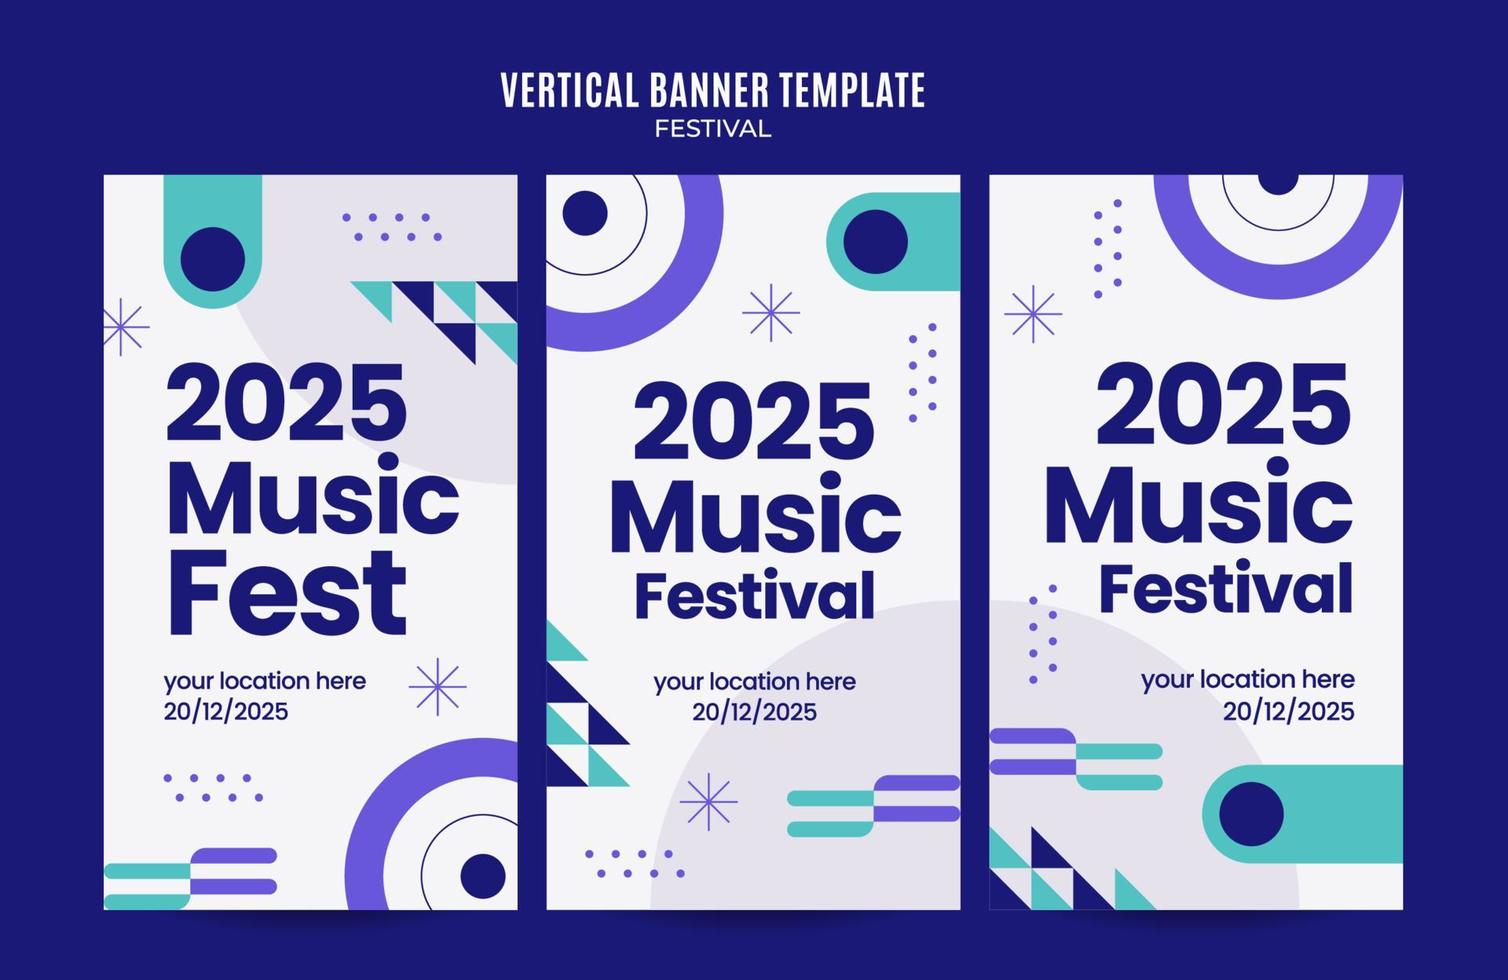 Festival Web Banner for Social Media Vertical Poster, banner, space area and background vector